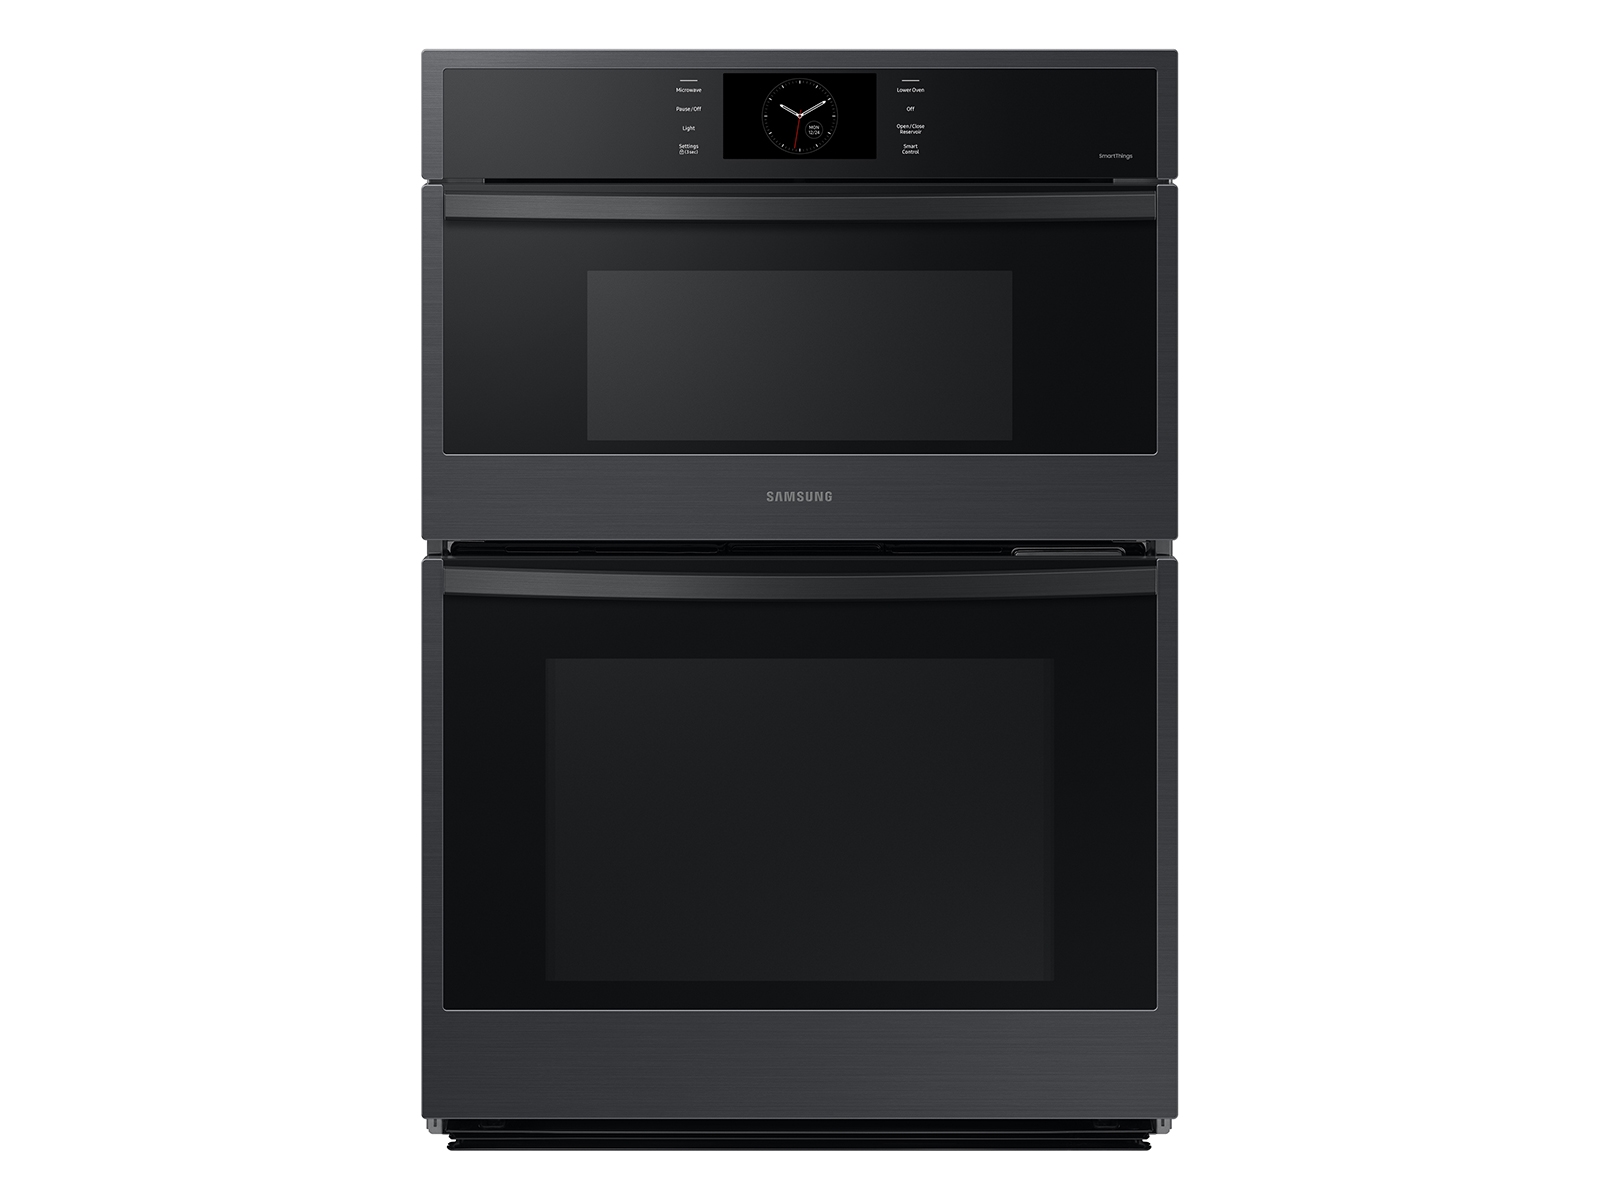 30 Microwave Combination Wall Oven in Matte Black